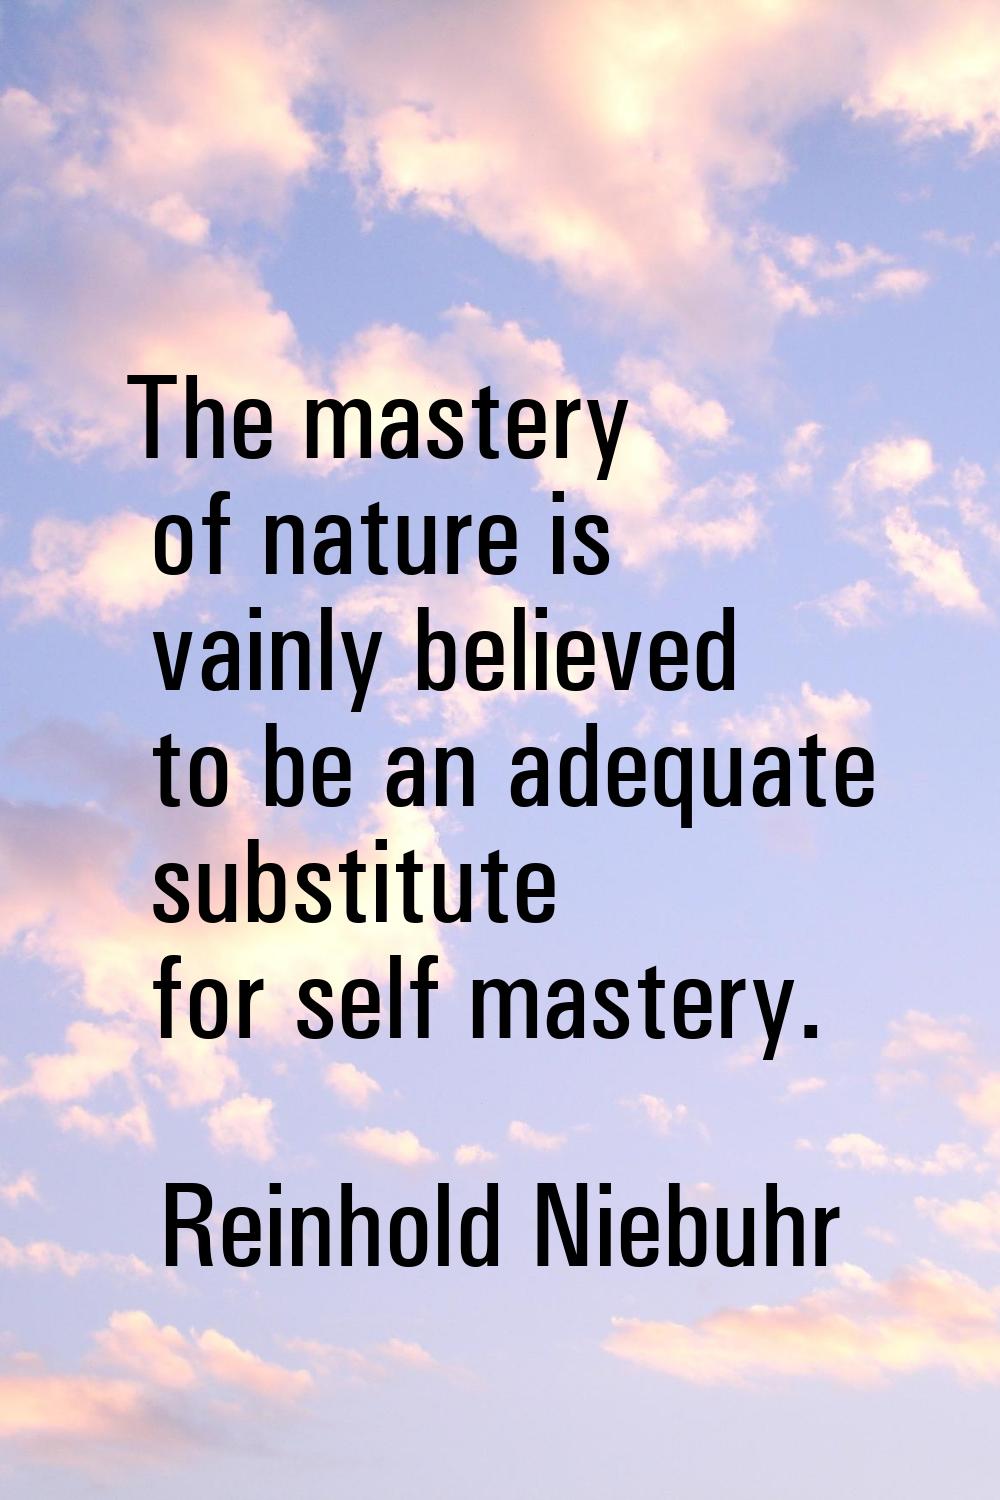 The mastery of nature is vainly believed to be an adequate substitute for self mastery.